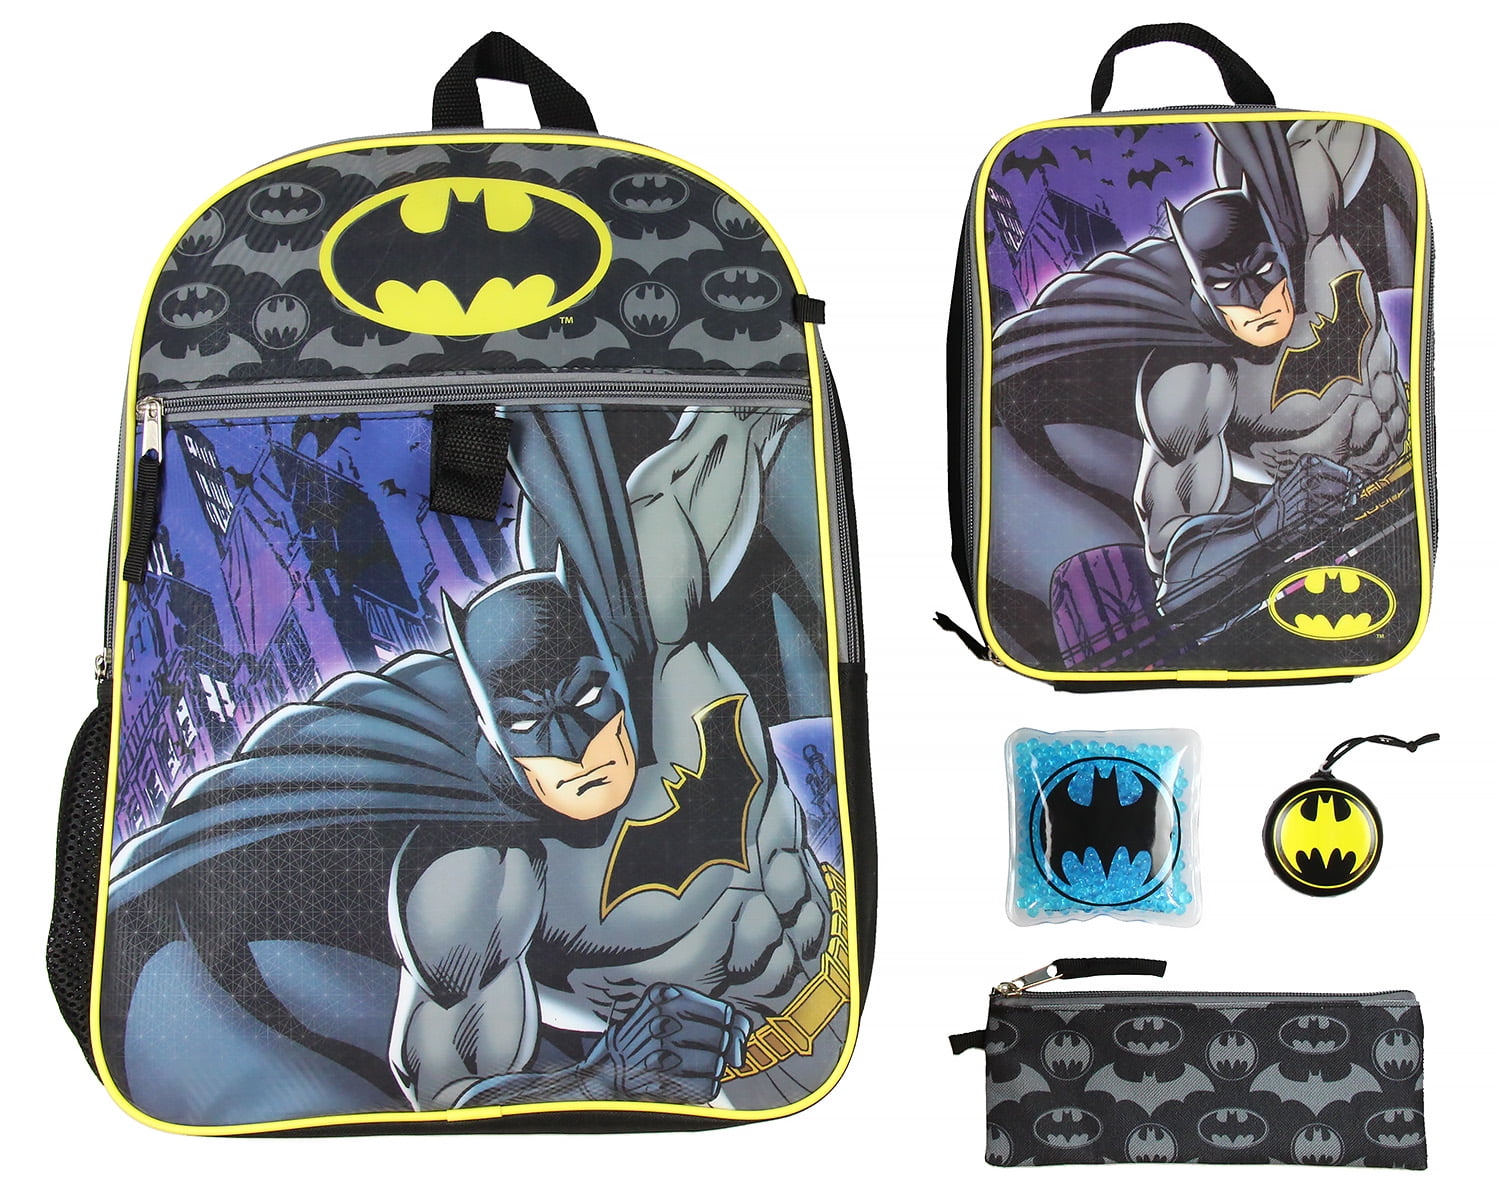 Waterproof Mini Backpack Purse. Batman Theme With Faux Leather - Etsy